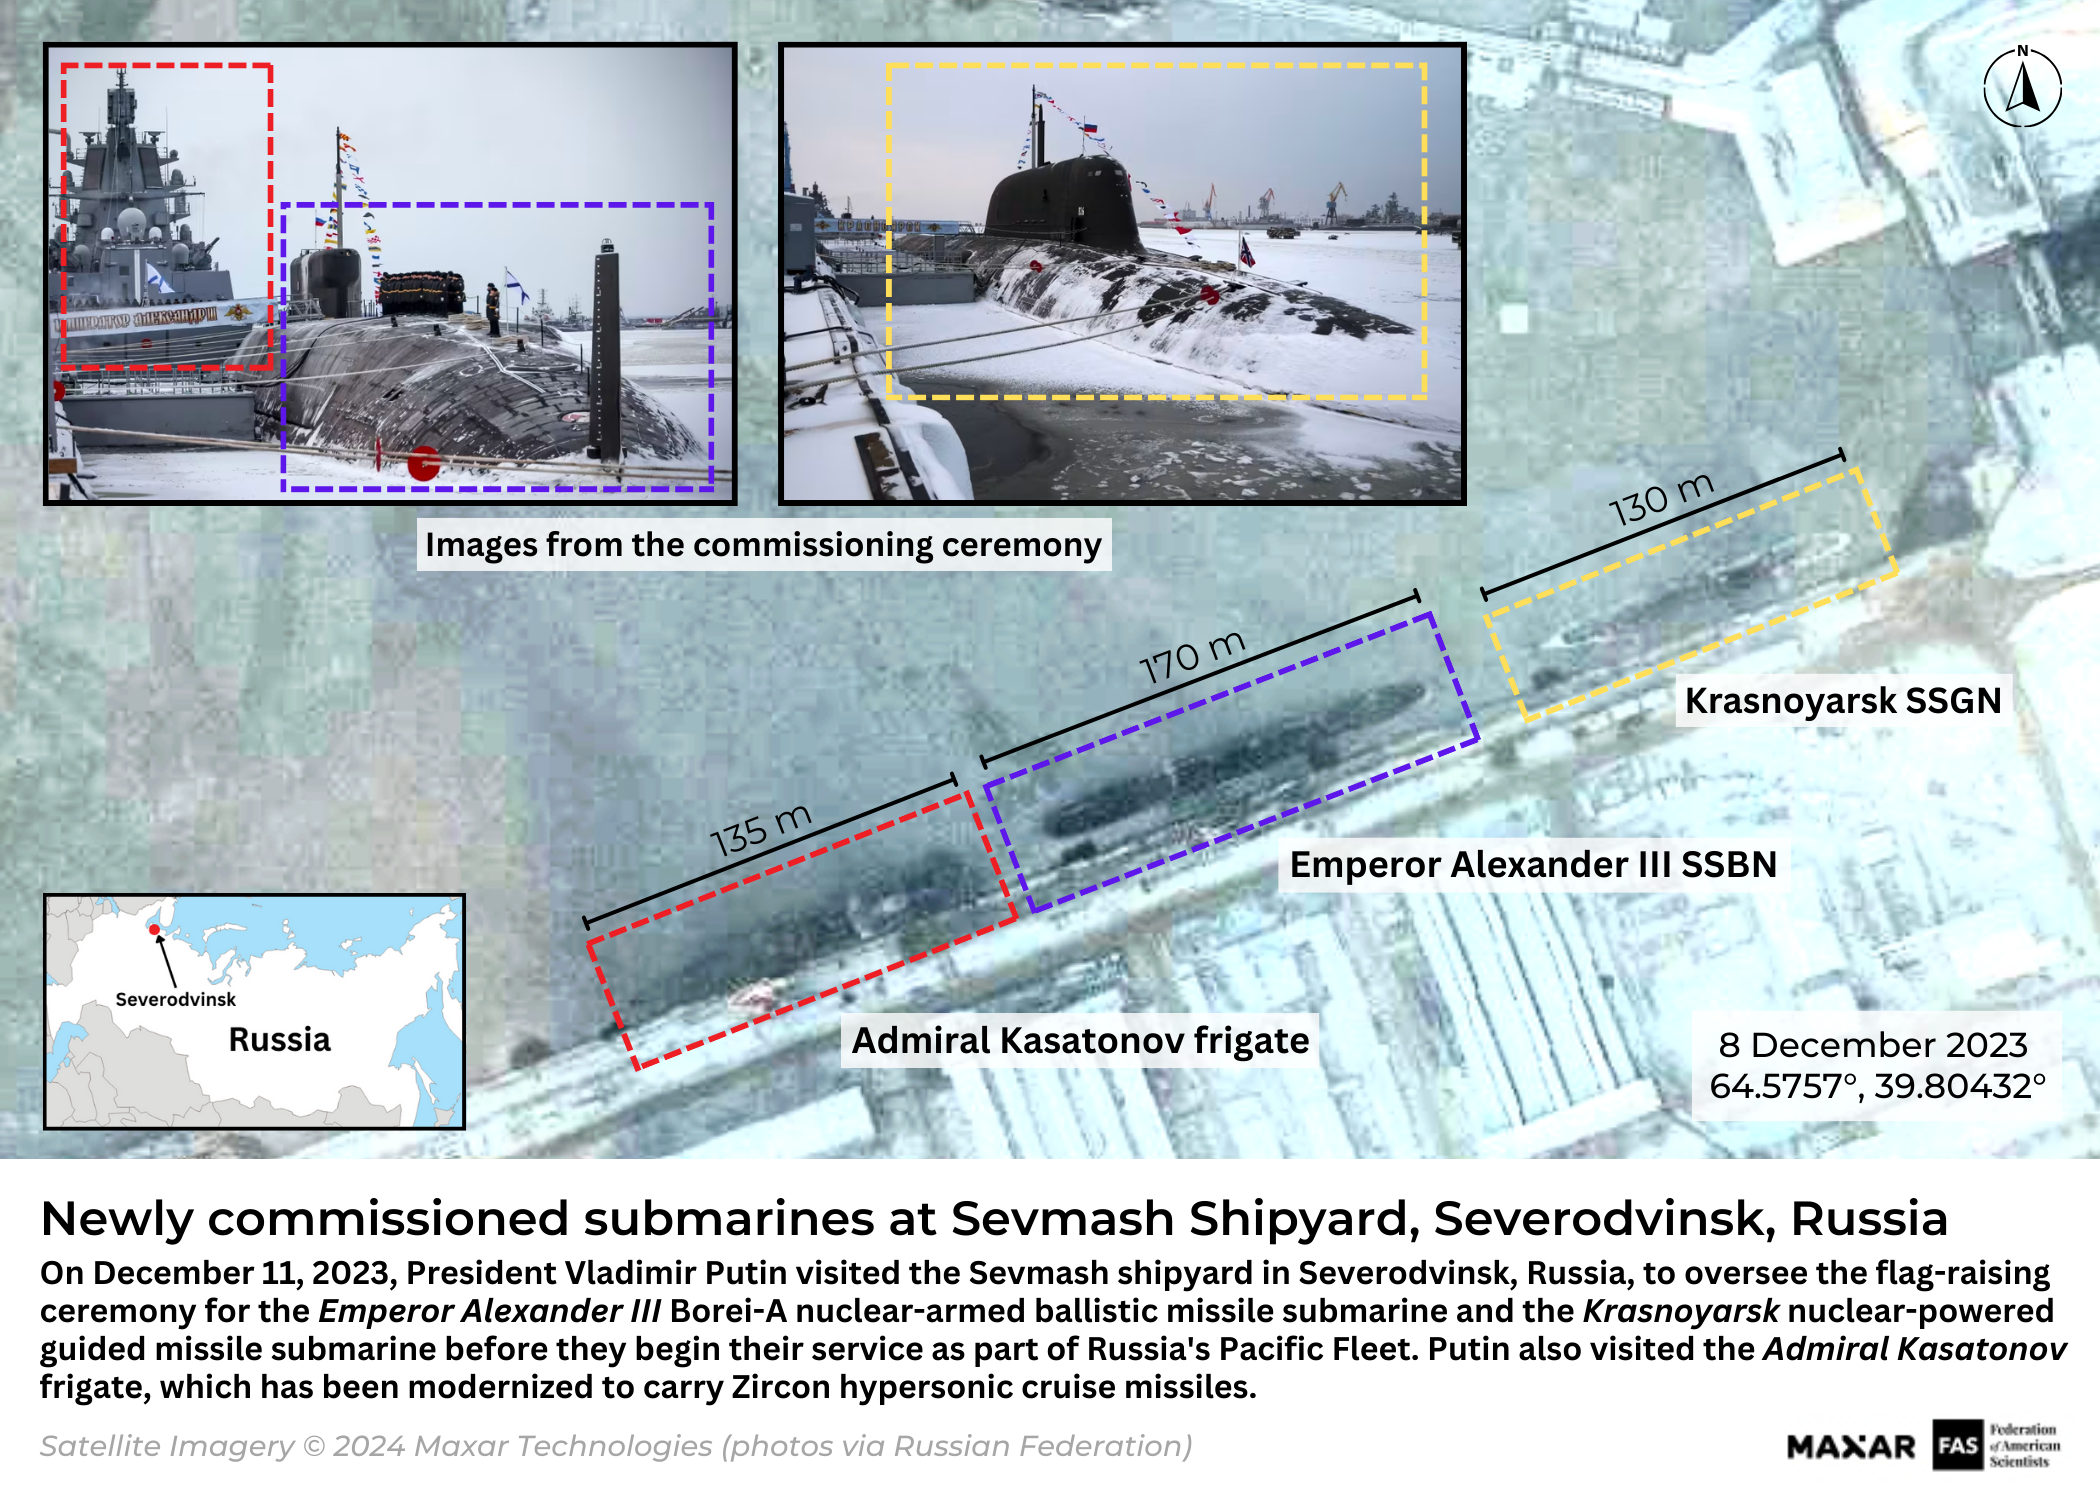 On December 11, 2023, President Vladimir Putin visited the Sevmash shipyard in Severodvinsk, Russia, to oversee the flag-raising ceremony for the Emperor Alexander III Borei-A nuclear-armed ballistic missile submarine and the Krasnoyarsk nuclear-powered guided missile submarine before they begin their service as part of Russia's Pacific Fleet. Putin also visited the Admiral Kasatonov frigate, which has been modernized to carry Zircon hypersonic cruise missiles